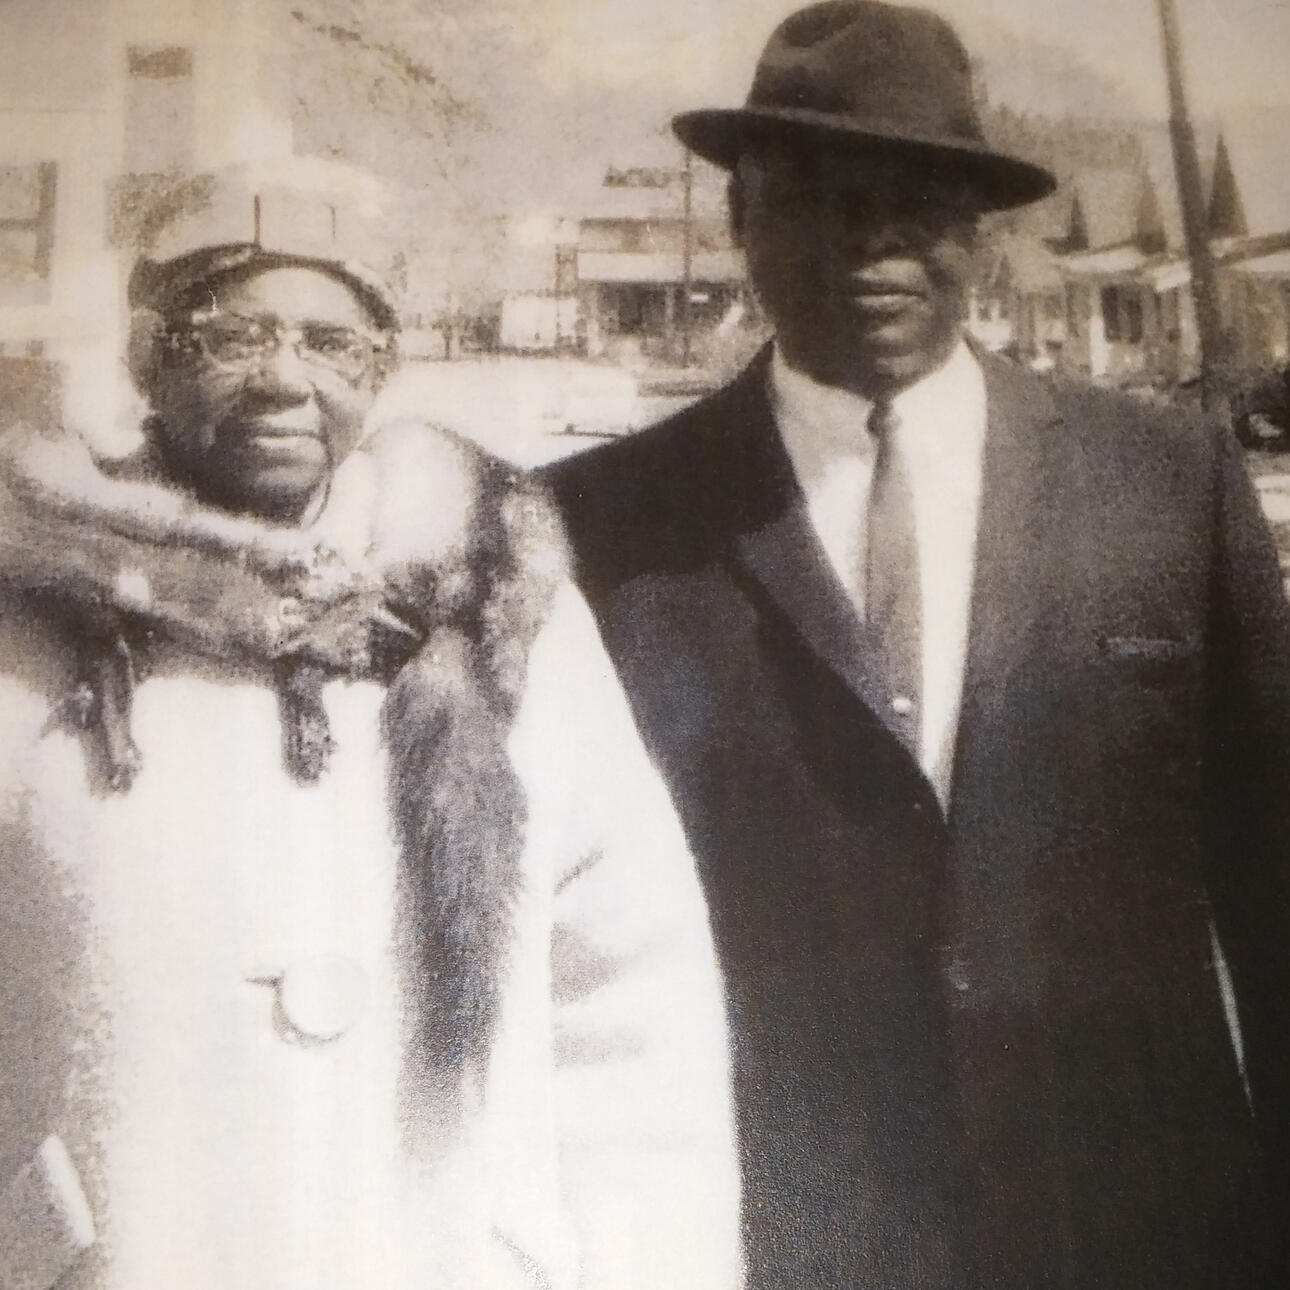 vintage photograph of older couple; the man is wearing a suit and hat and the woman is wearing a hat, coat and fox fur collar